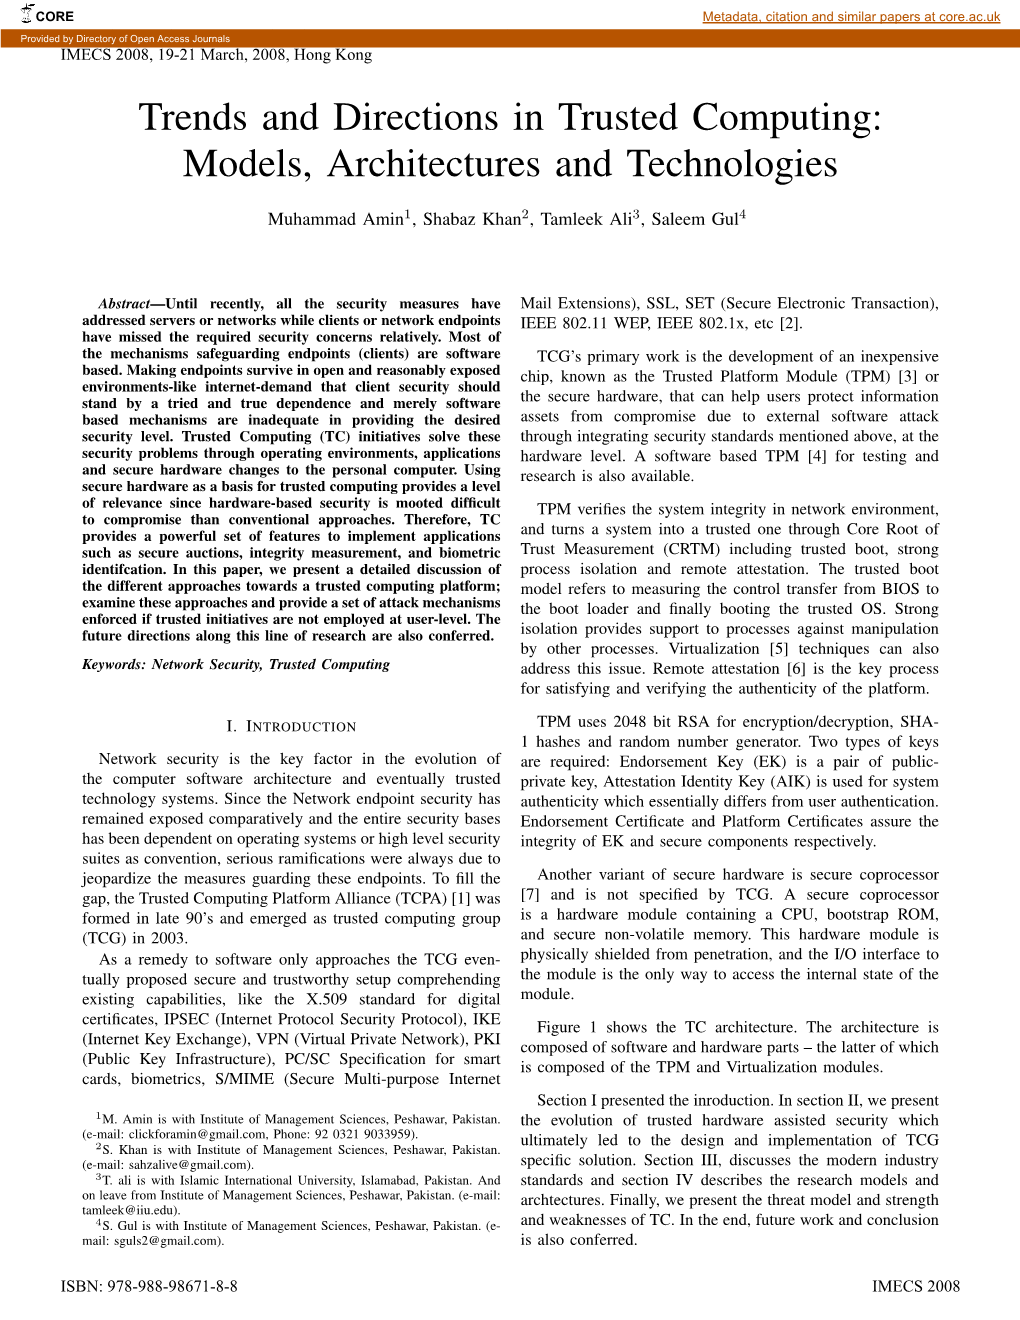 Trends and Directions in Trusted Computing: Models, Architectures and Technologies